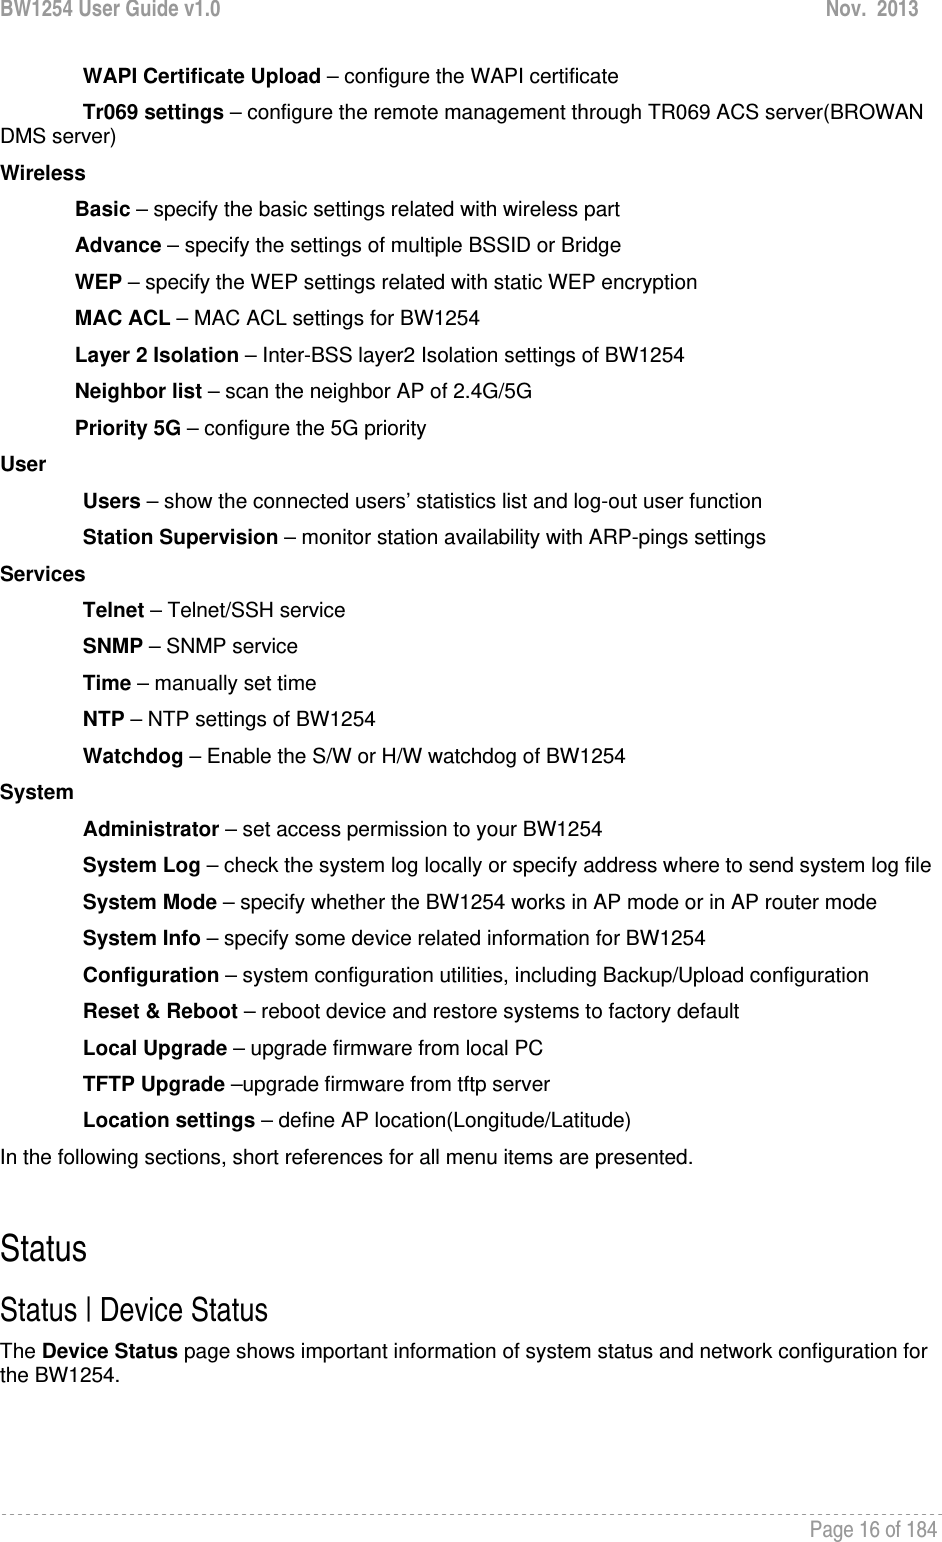 BW1254 User Guide v1.0  Nov.  2013     Page 16 of 184   WAPI Certificate Upload – configure the WAPI certificate Tr069 settings – configure the remote management through TR069 ACS server(BROWAN DMS server) Wireless Basic – specify the basic settings related with wireless part Advance – specify the settings of multiple BSSID or Bridge WEP – specify the WEP settings related with static WEP encryption MAC ACL – MAC ACL settings for BW1254 Layer 2 Isolation – Inter-BSS layer2 Isolation settings of BW1254 Neighbor list – scan the neighbor AP of 2.4G/5G Priority 5G – configure the 5G priority User Users – show the connected users’ statistics list and log-out user function Station Supervision – monitor station availability with ARP-pings settings Services Telnet – Telnet/SSH service SNMP – SNMP service Time – manually set time NTP – NTP settings of BW1254 Watchdog – Enable the S/W or H/W watchdog of BW1254 System Administrator – set access permission to your BW1254 System Log – check the system log locally or specify address where to send system log file System Mode – specify whether the BW1254 works in AP mode or in AP router mode System Info – specify some device related information for BW1254 Configuration – system configuration utilities, including Backup/Upload configuration Reset &amp; Reboot – reboot device and restore systems to factory default Local Upgrade – upgrade firmware from local PC TFTP Upgrade –upgrade firmware from tftp server Location settings – define AP location(Longitude/Latitude) In the following sections, short references for all menu items are presented.  Status Status | Device Status The Device Status page shows important information of system status and network configuration for the BW1254. 